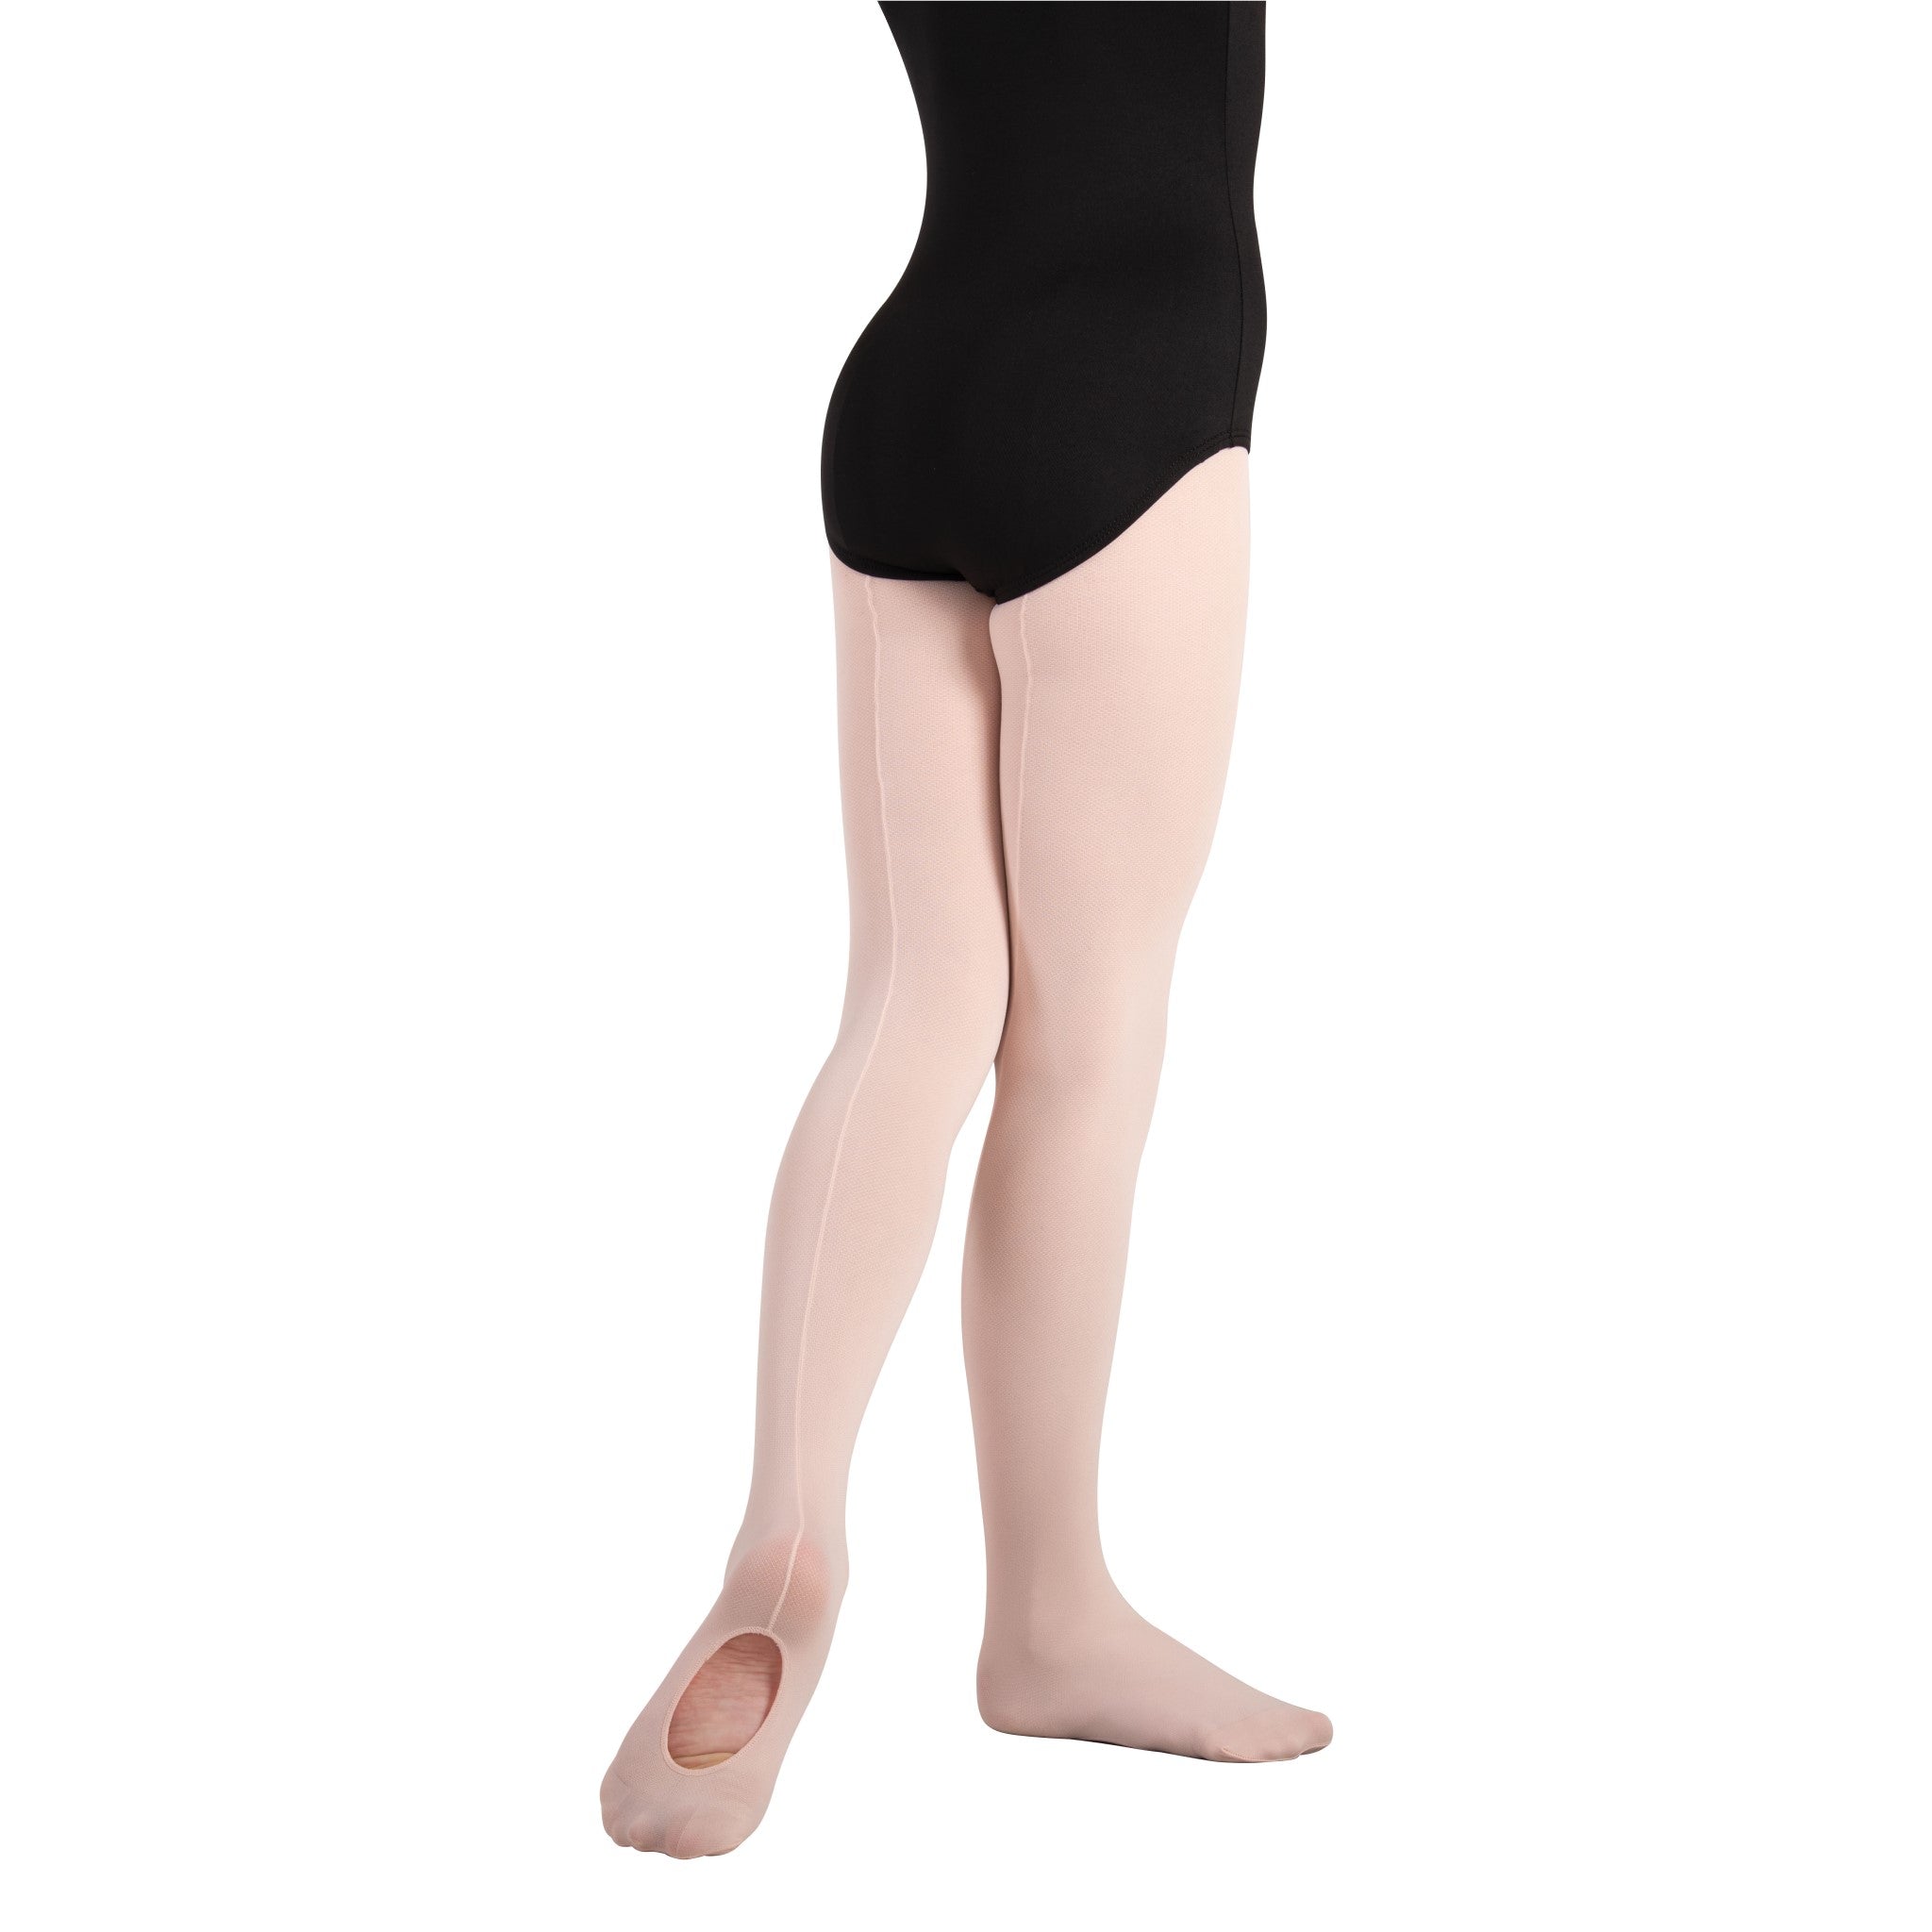 A45 Backseam Mesh Convertible Tights by Body Wrappers